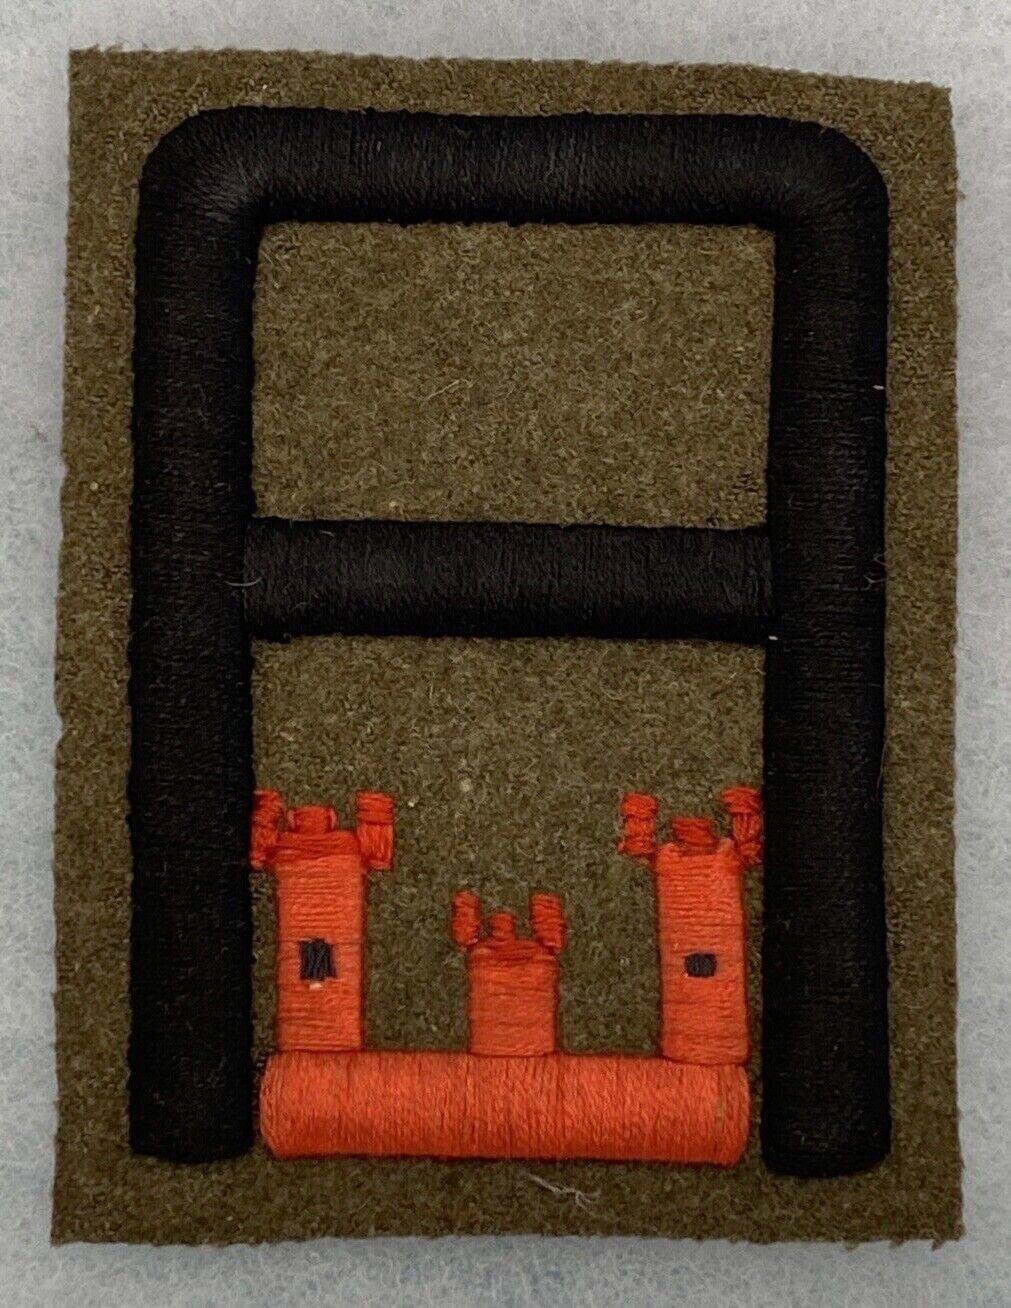 RARE ORIGINAL WW1 US 1st ARMY ENGINEER WOOL PATCH 3 1/2” X 4 3/4” THEATER MADE